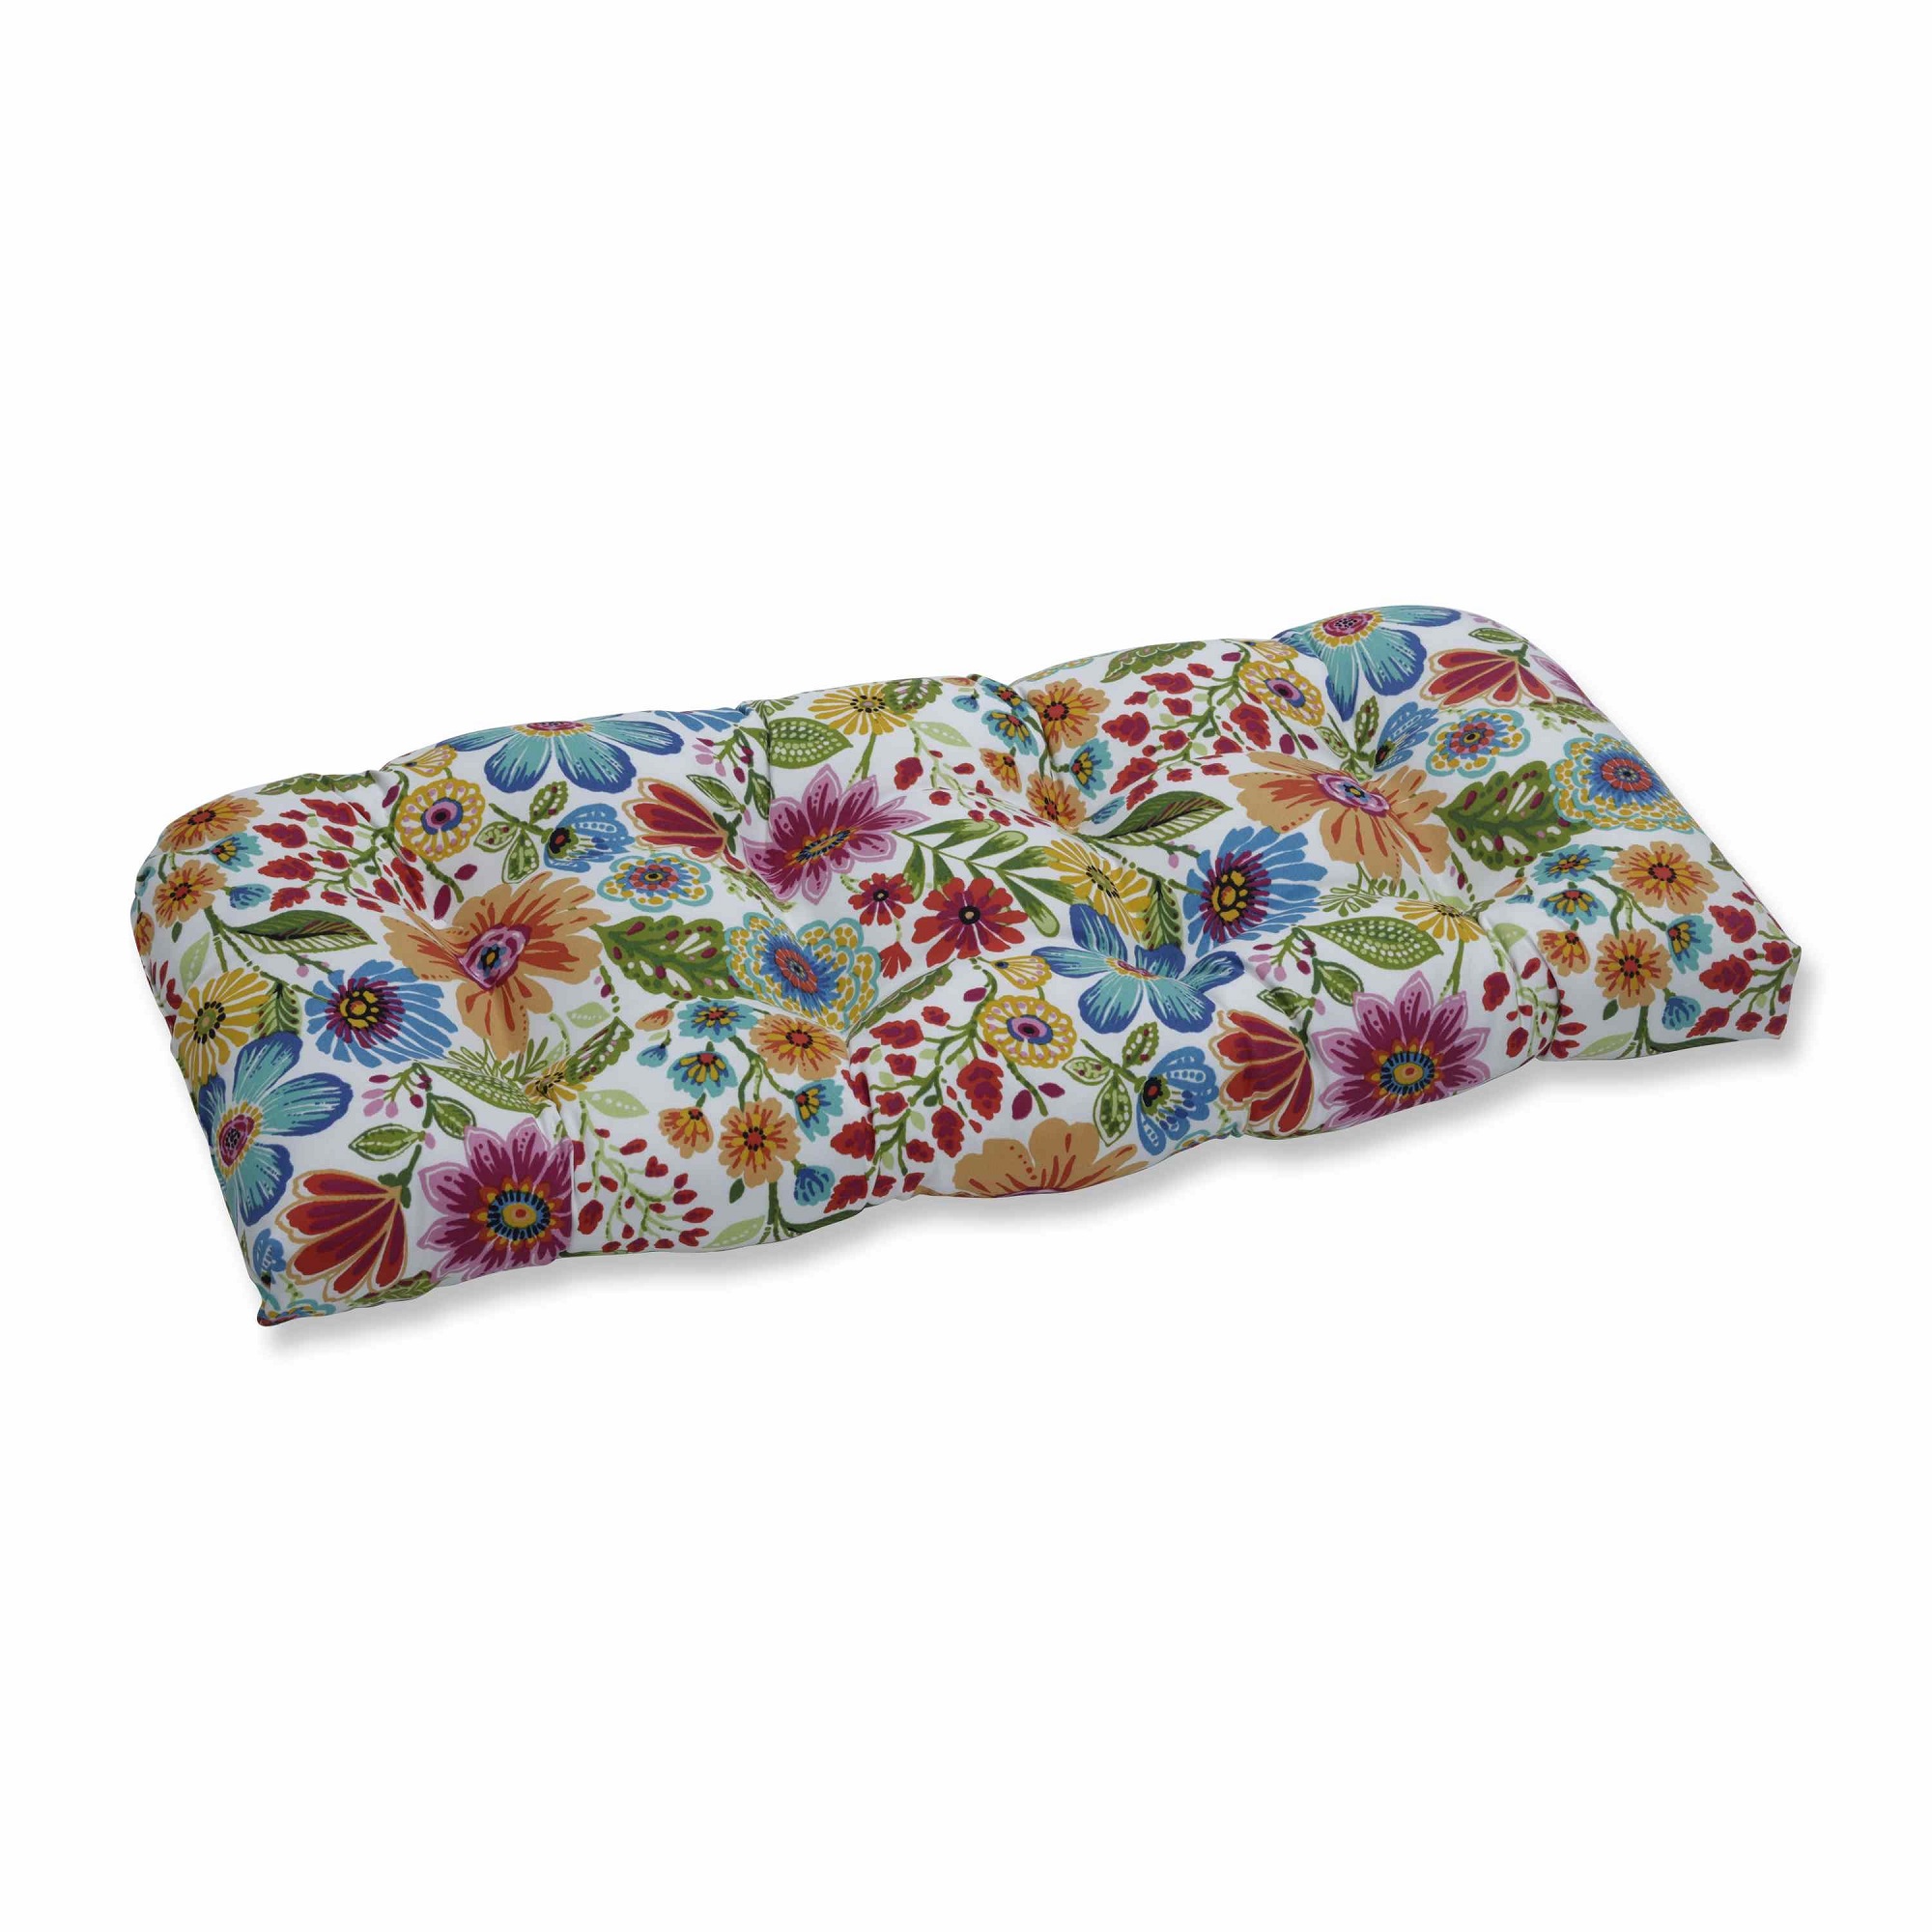 CC Home Furnishings 44" Vibrantly Colored Floral Pattern Outdoor Patio Wicker Loveseat Cushion